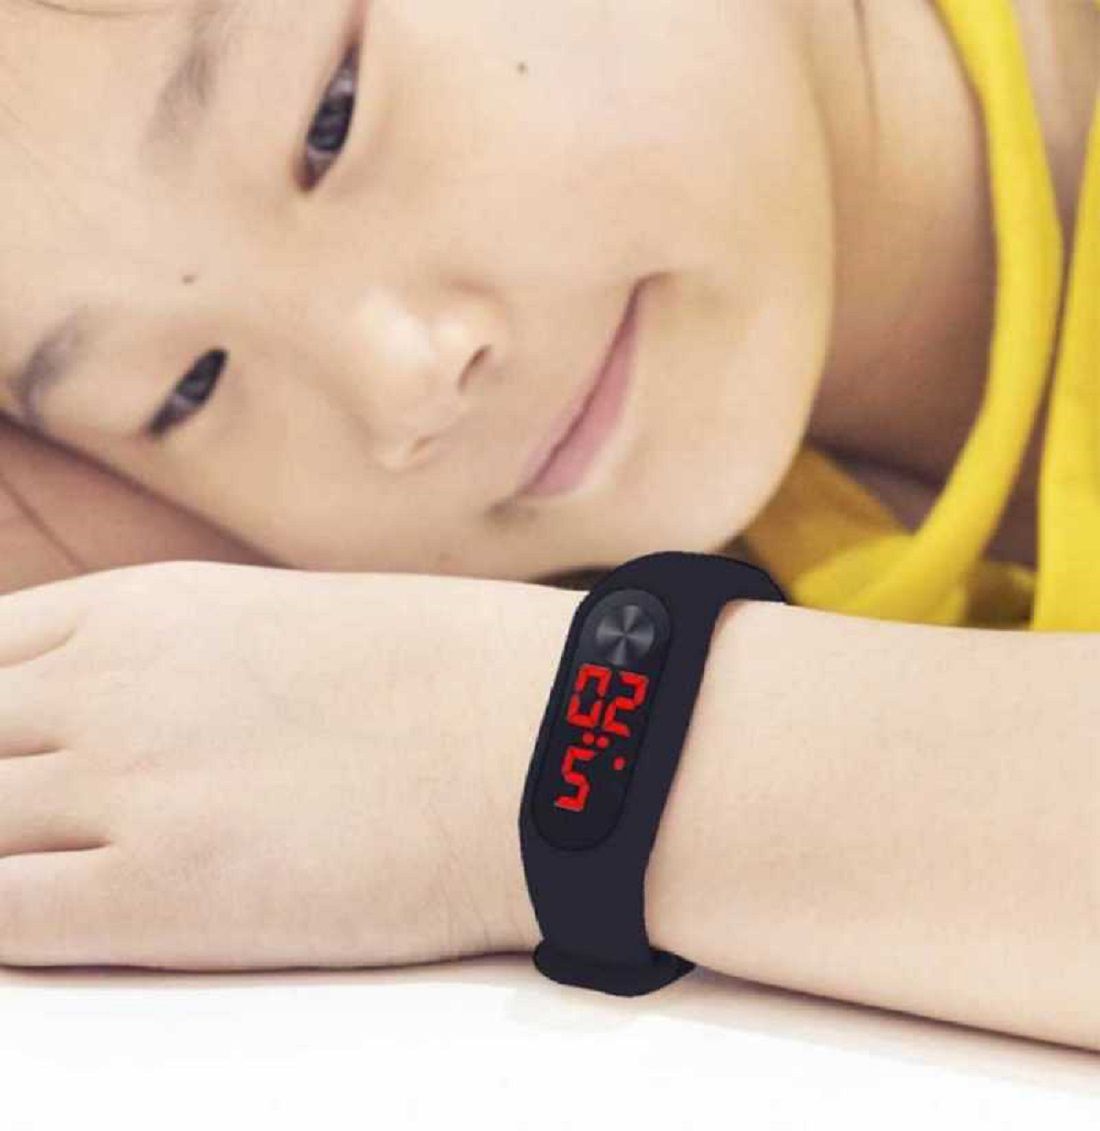 Driton LED Digital Band Watch For Kids Price in India: Buy Driton LED Digital Band Watch For 